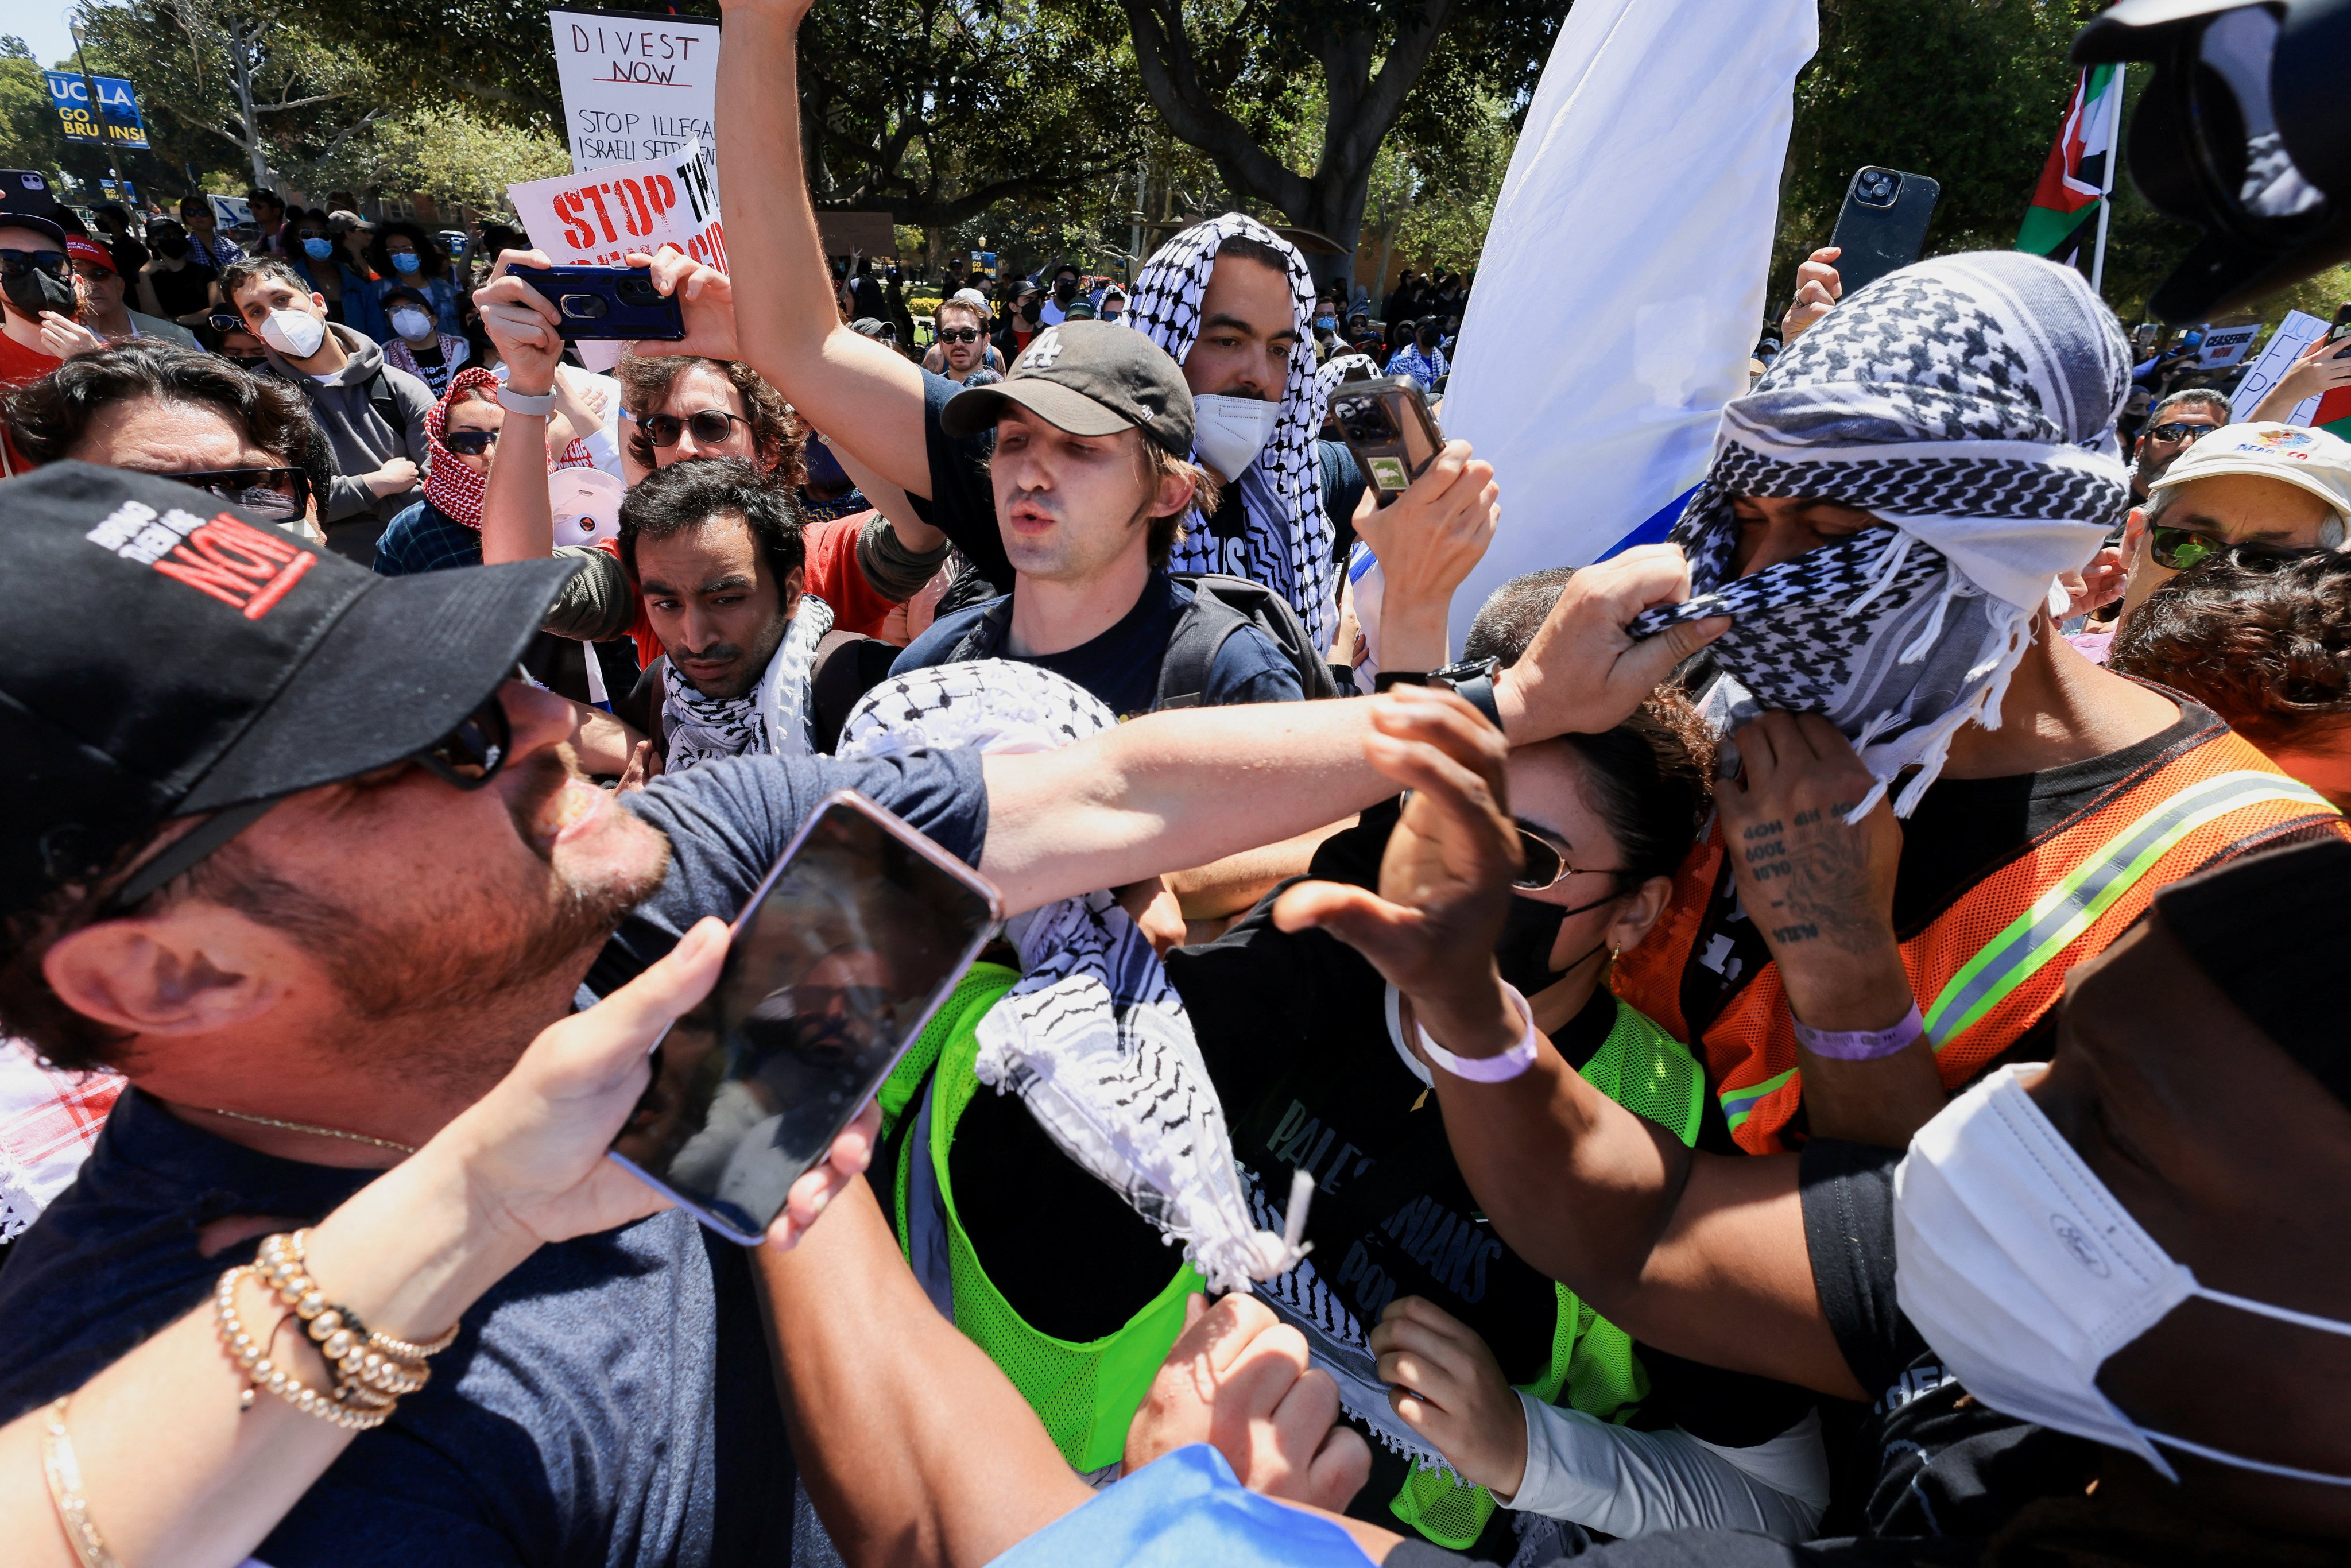 Pro-Israel protesters scuffle with those supporting Palestinians in Gaza, at the University of California Los Angeles on April 28. Photo: Reuters